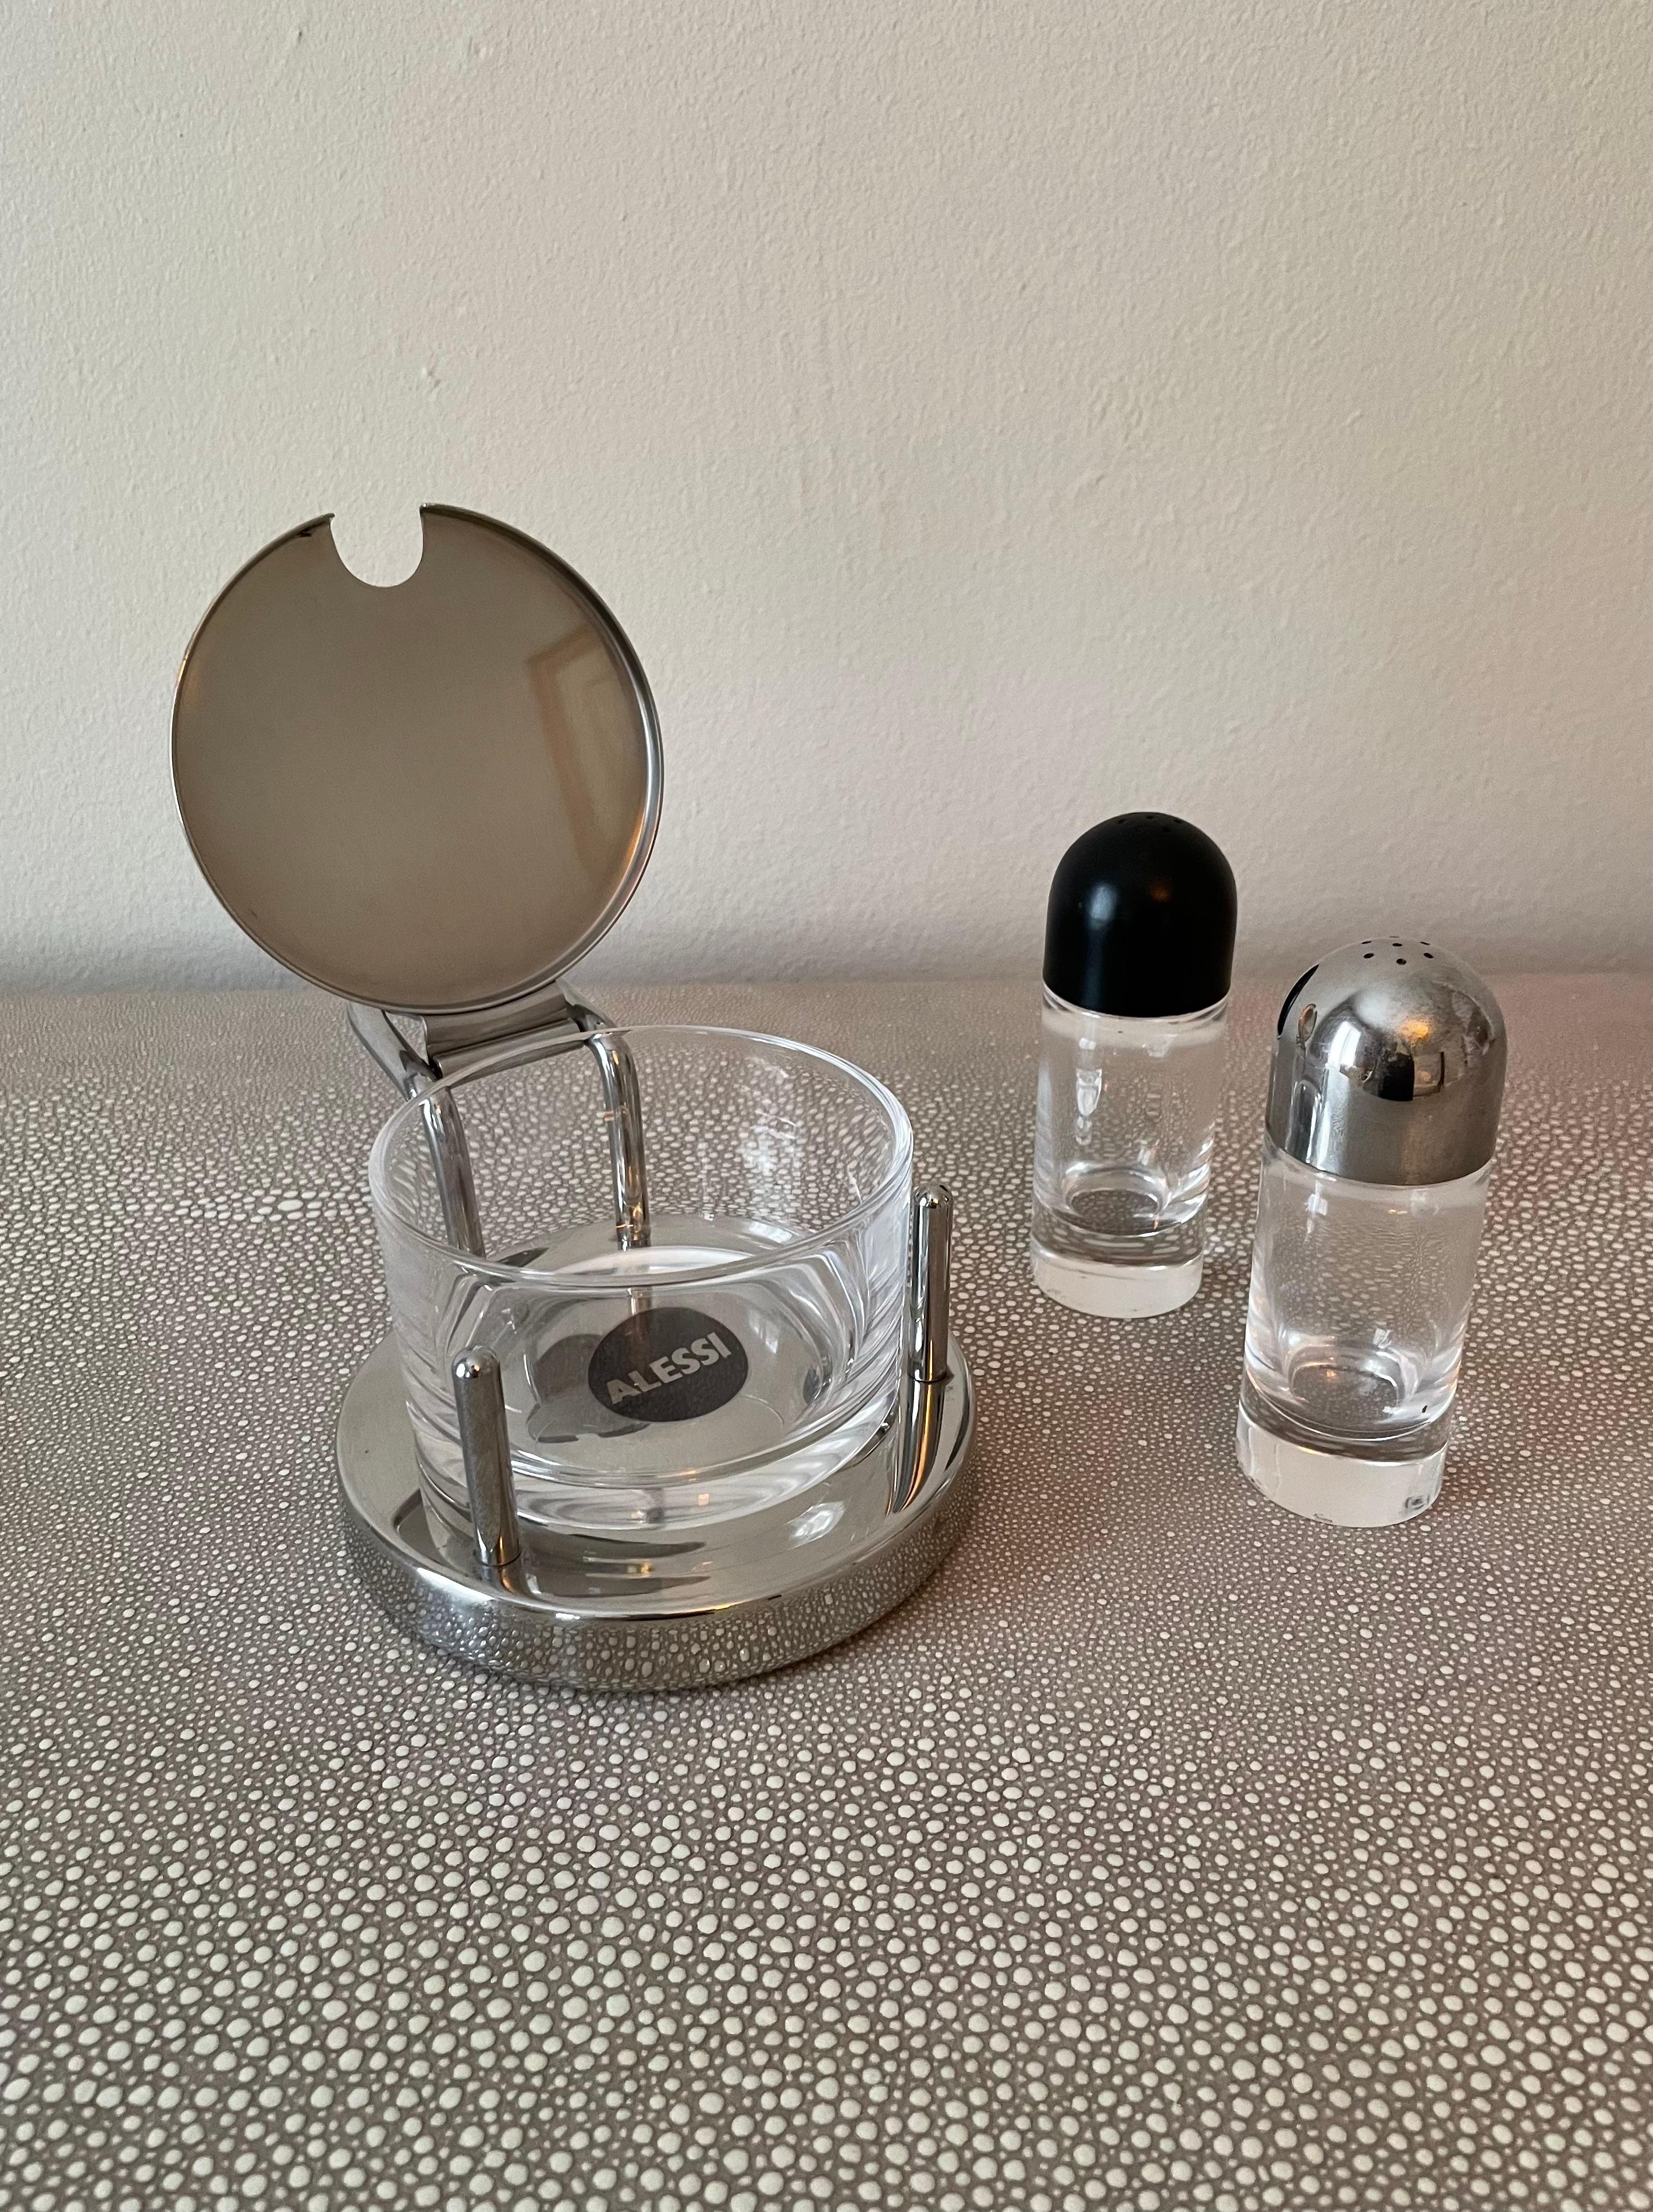 Sleek salt, pepper sugar set made in Italy by Alessi. Add sleek Italian cafe style to any table. The 'sugar' canister can be used for a variety of spices, perhaps even red pepper flakes. The set polishes quickly and easily to catch the afternoon